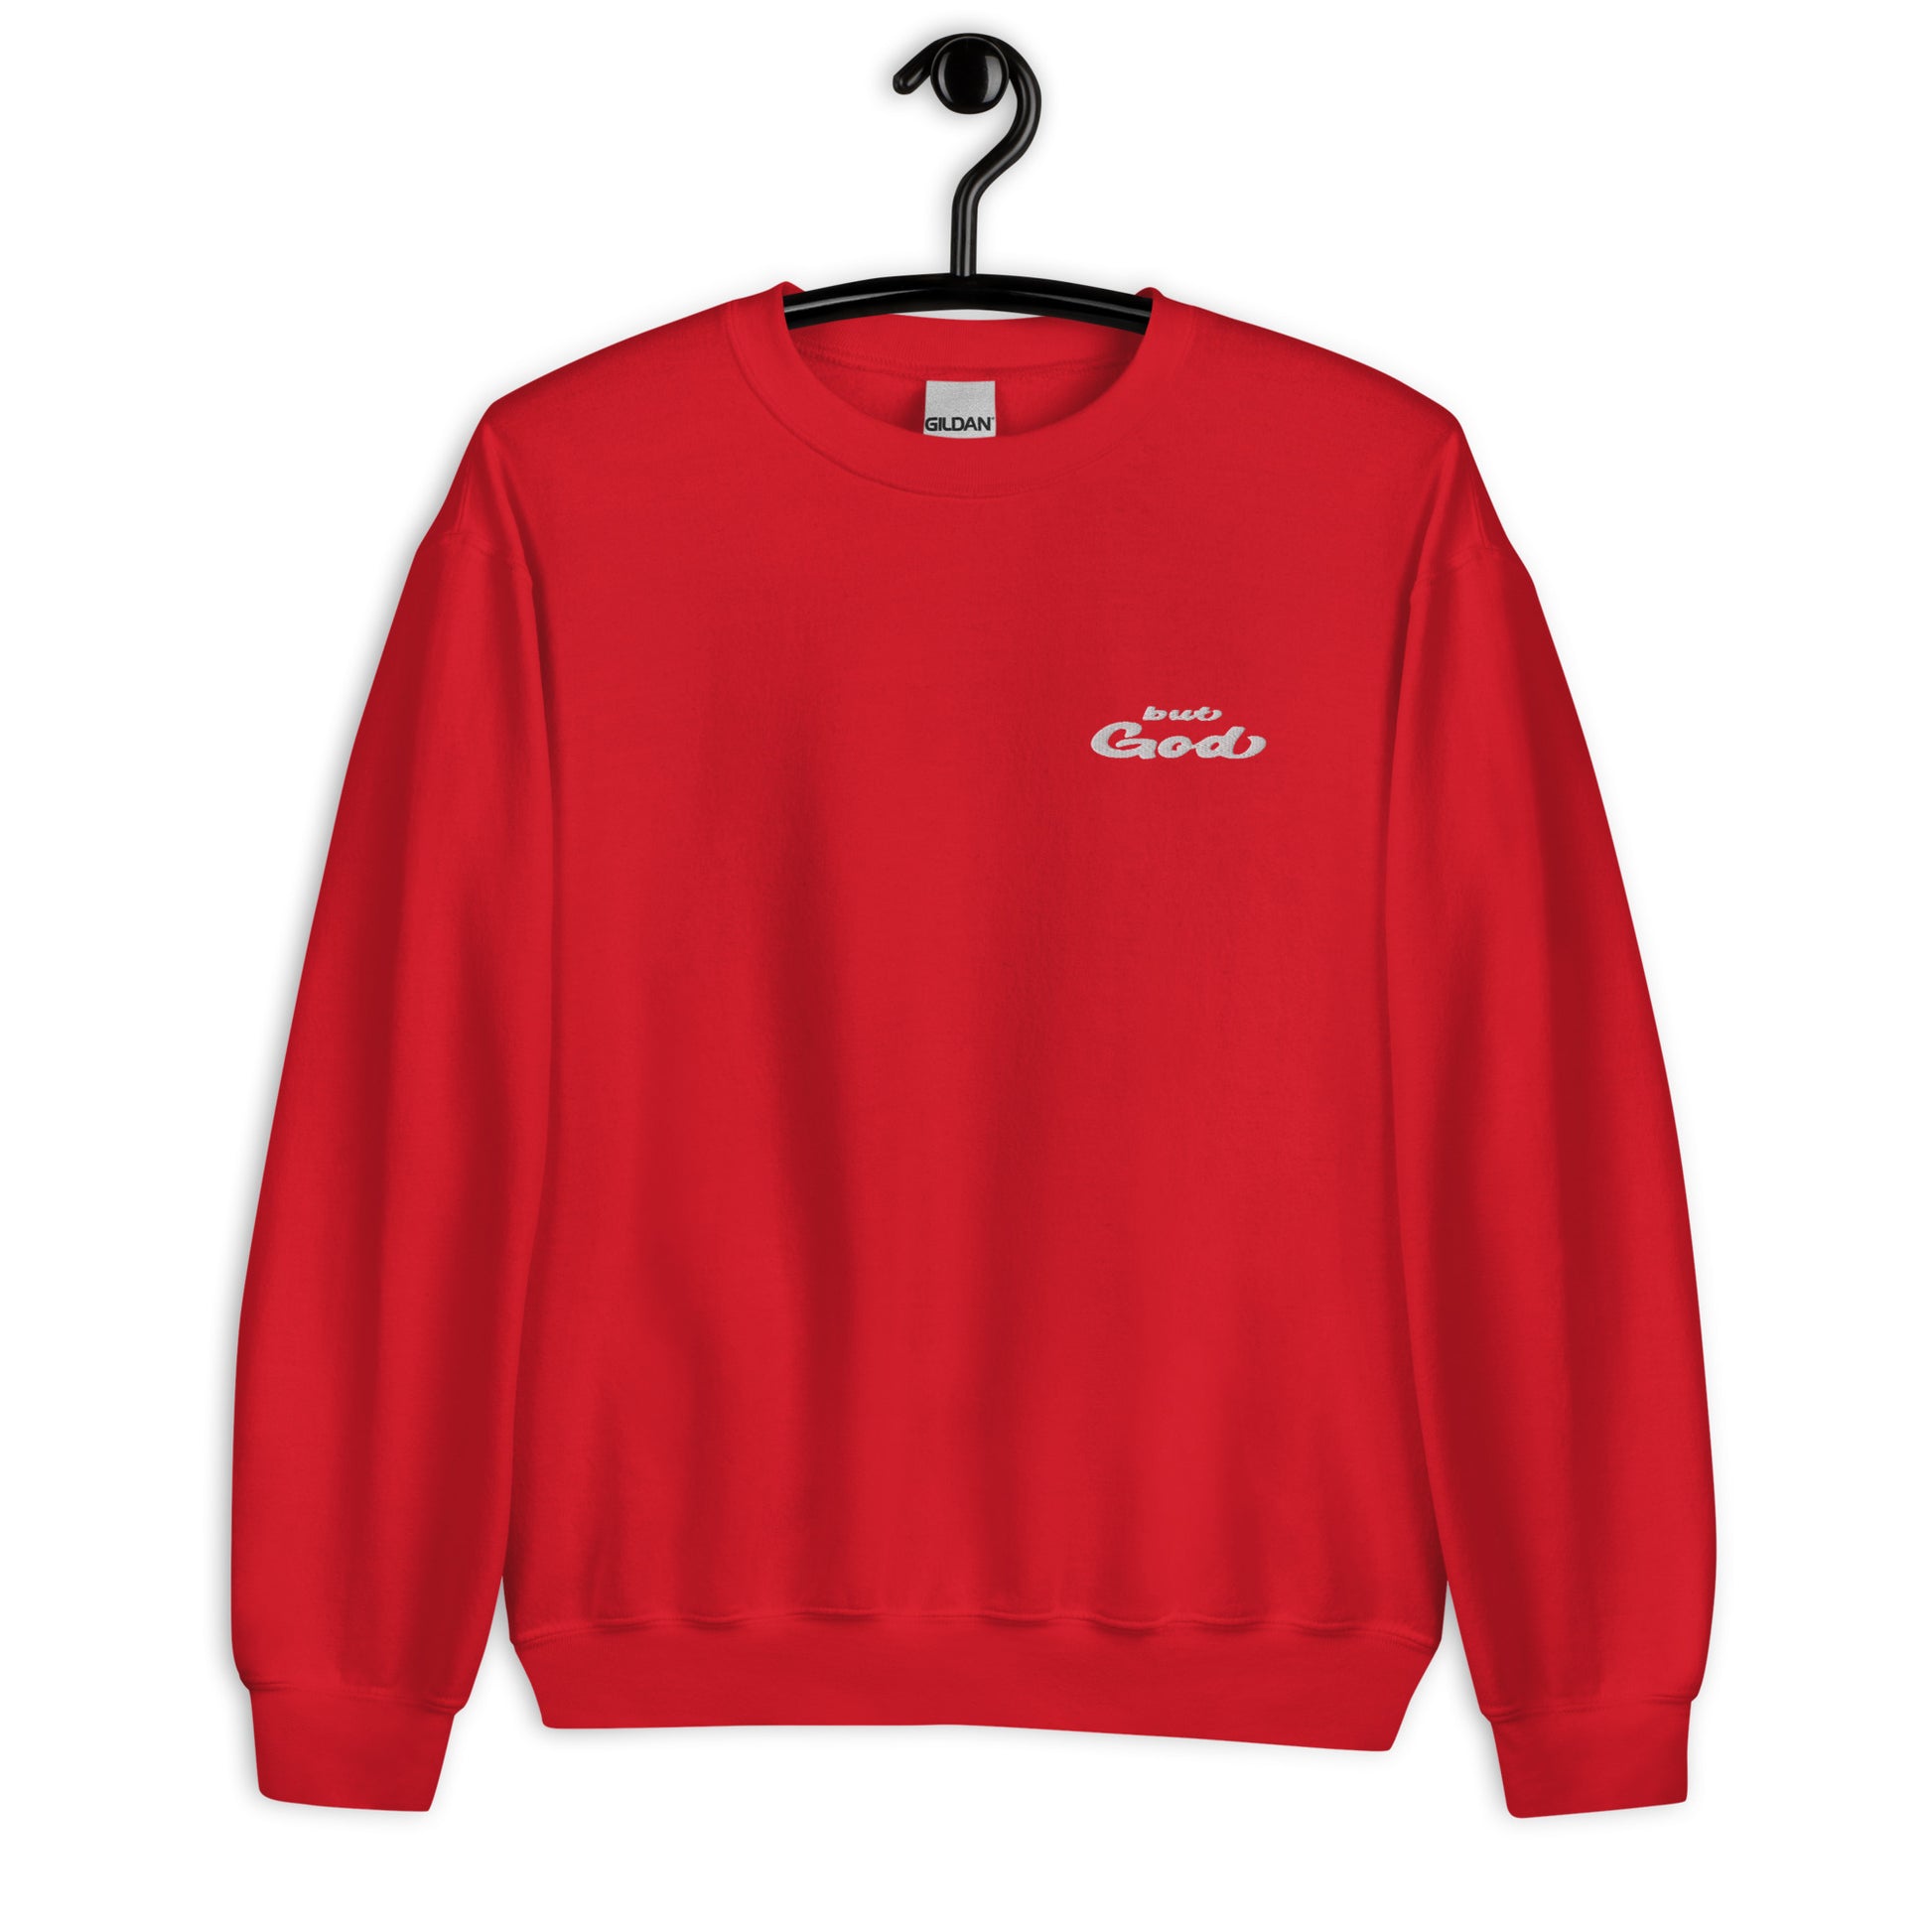 But God Embroidered Unisex Sweatshirt red